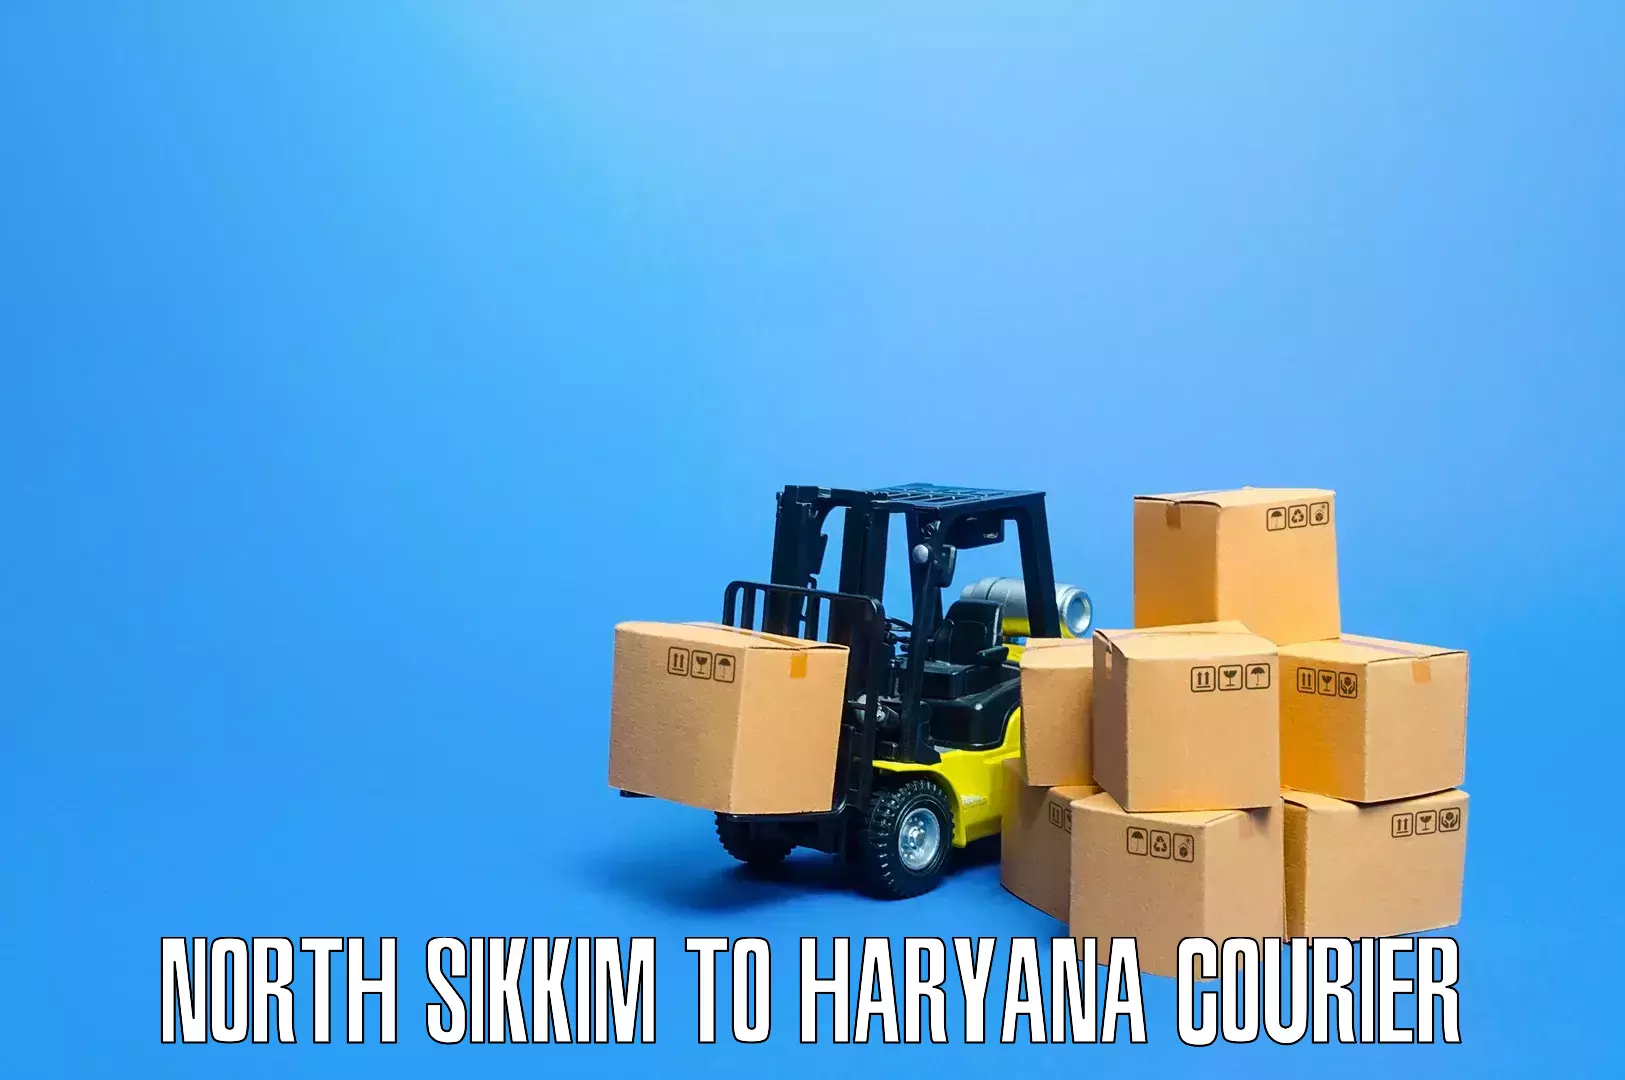 Quality moving company North Sikkim to NCR Haryana